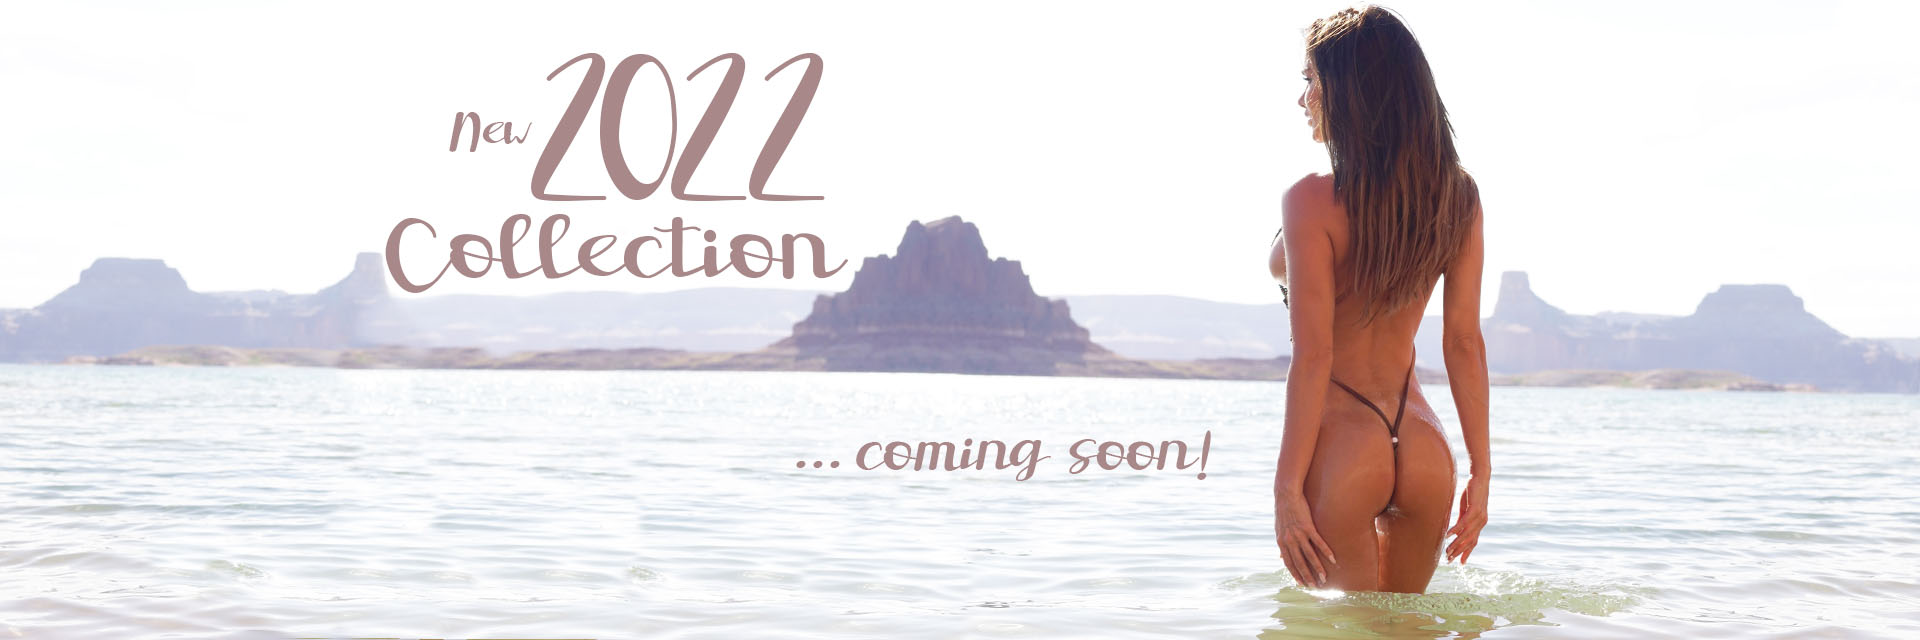 Colleen Kelly Designs / 2022 Swimwear Collection coming soon!